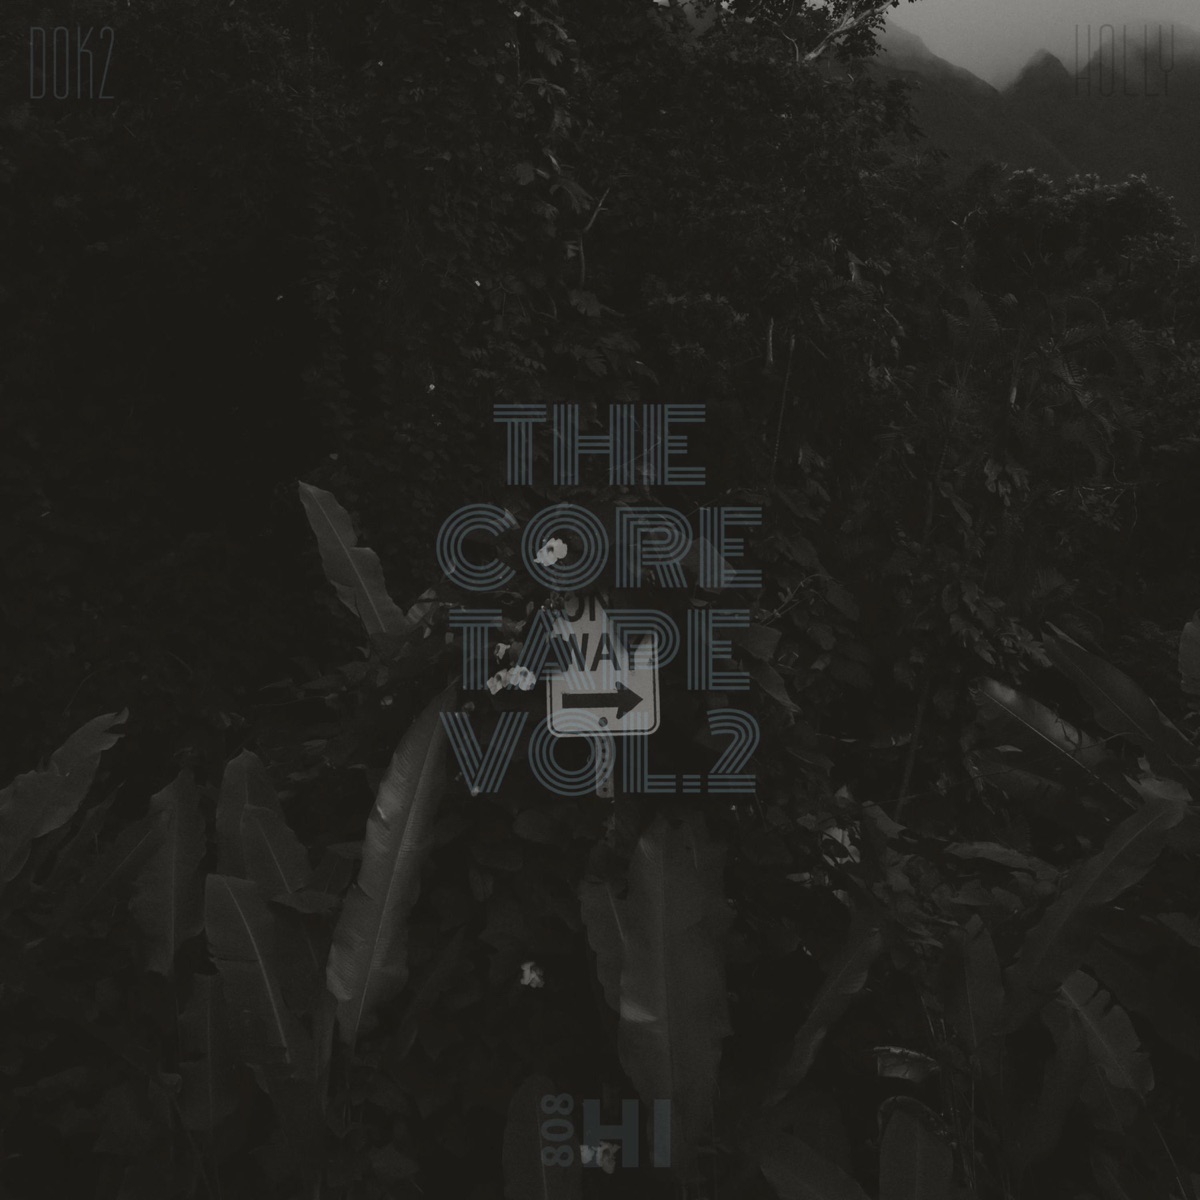 Dok2, Holly – THE CORE TAPE, Vol. 2